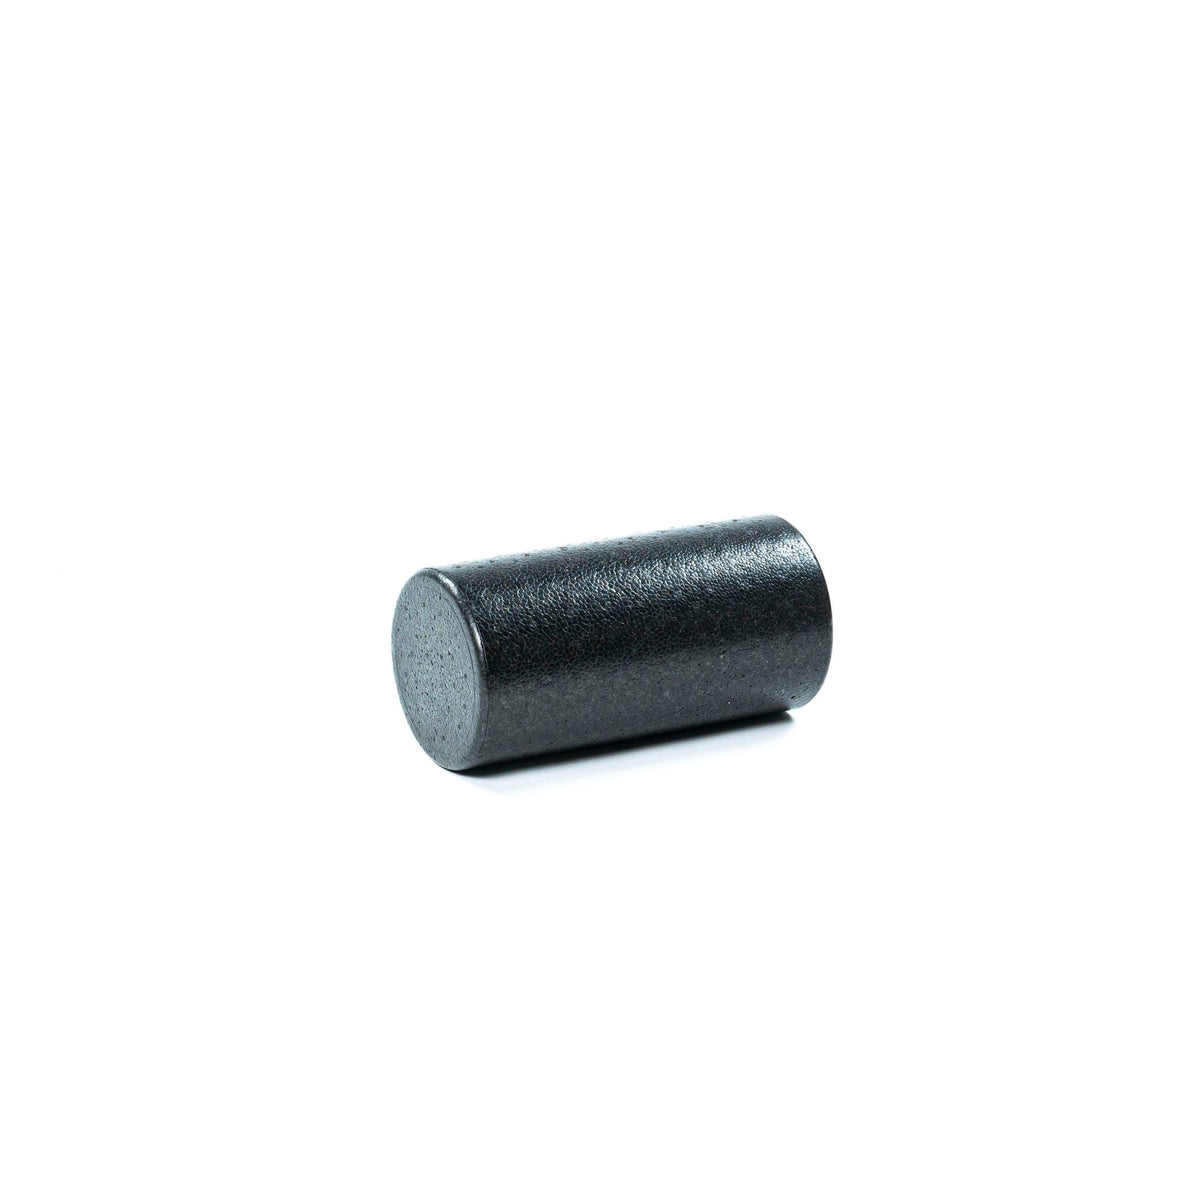 FitWay Equip. Black Foam Rollers - Fitness Experience